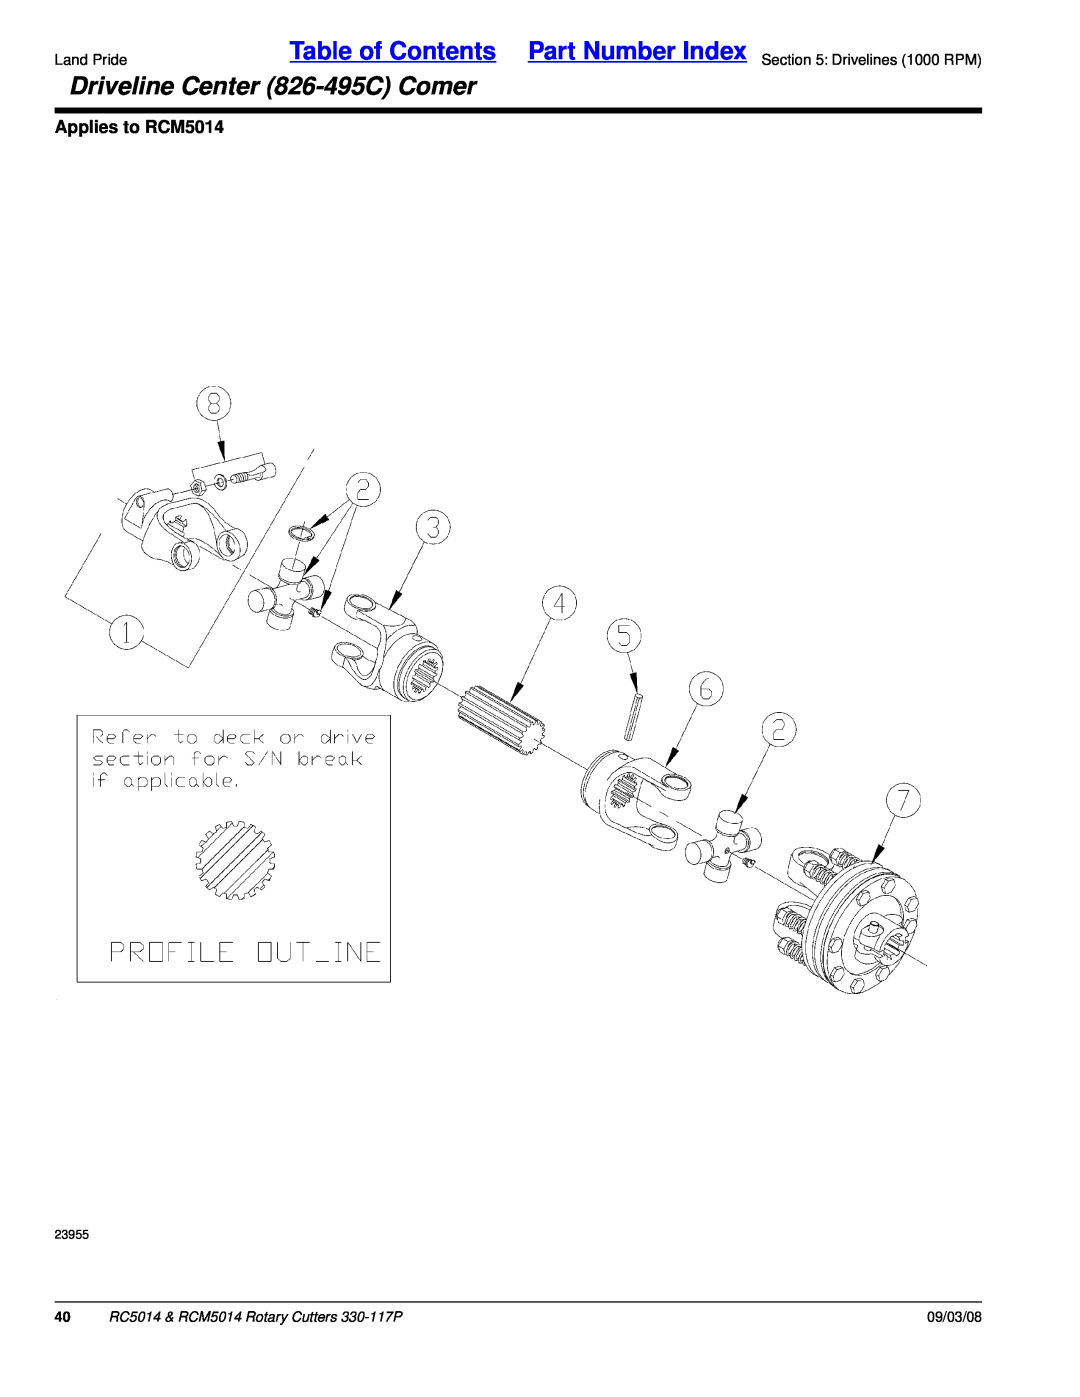 Land Pride manual Driveline Center 826-495CComer, Applies to RCM5014, RC5014 & RCM5014 Rotary Cutters 330-117P, 09/03/08 